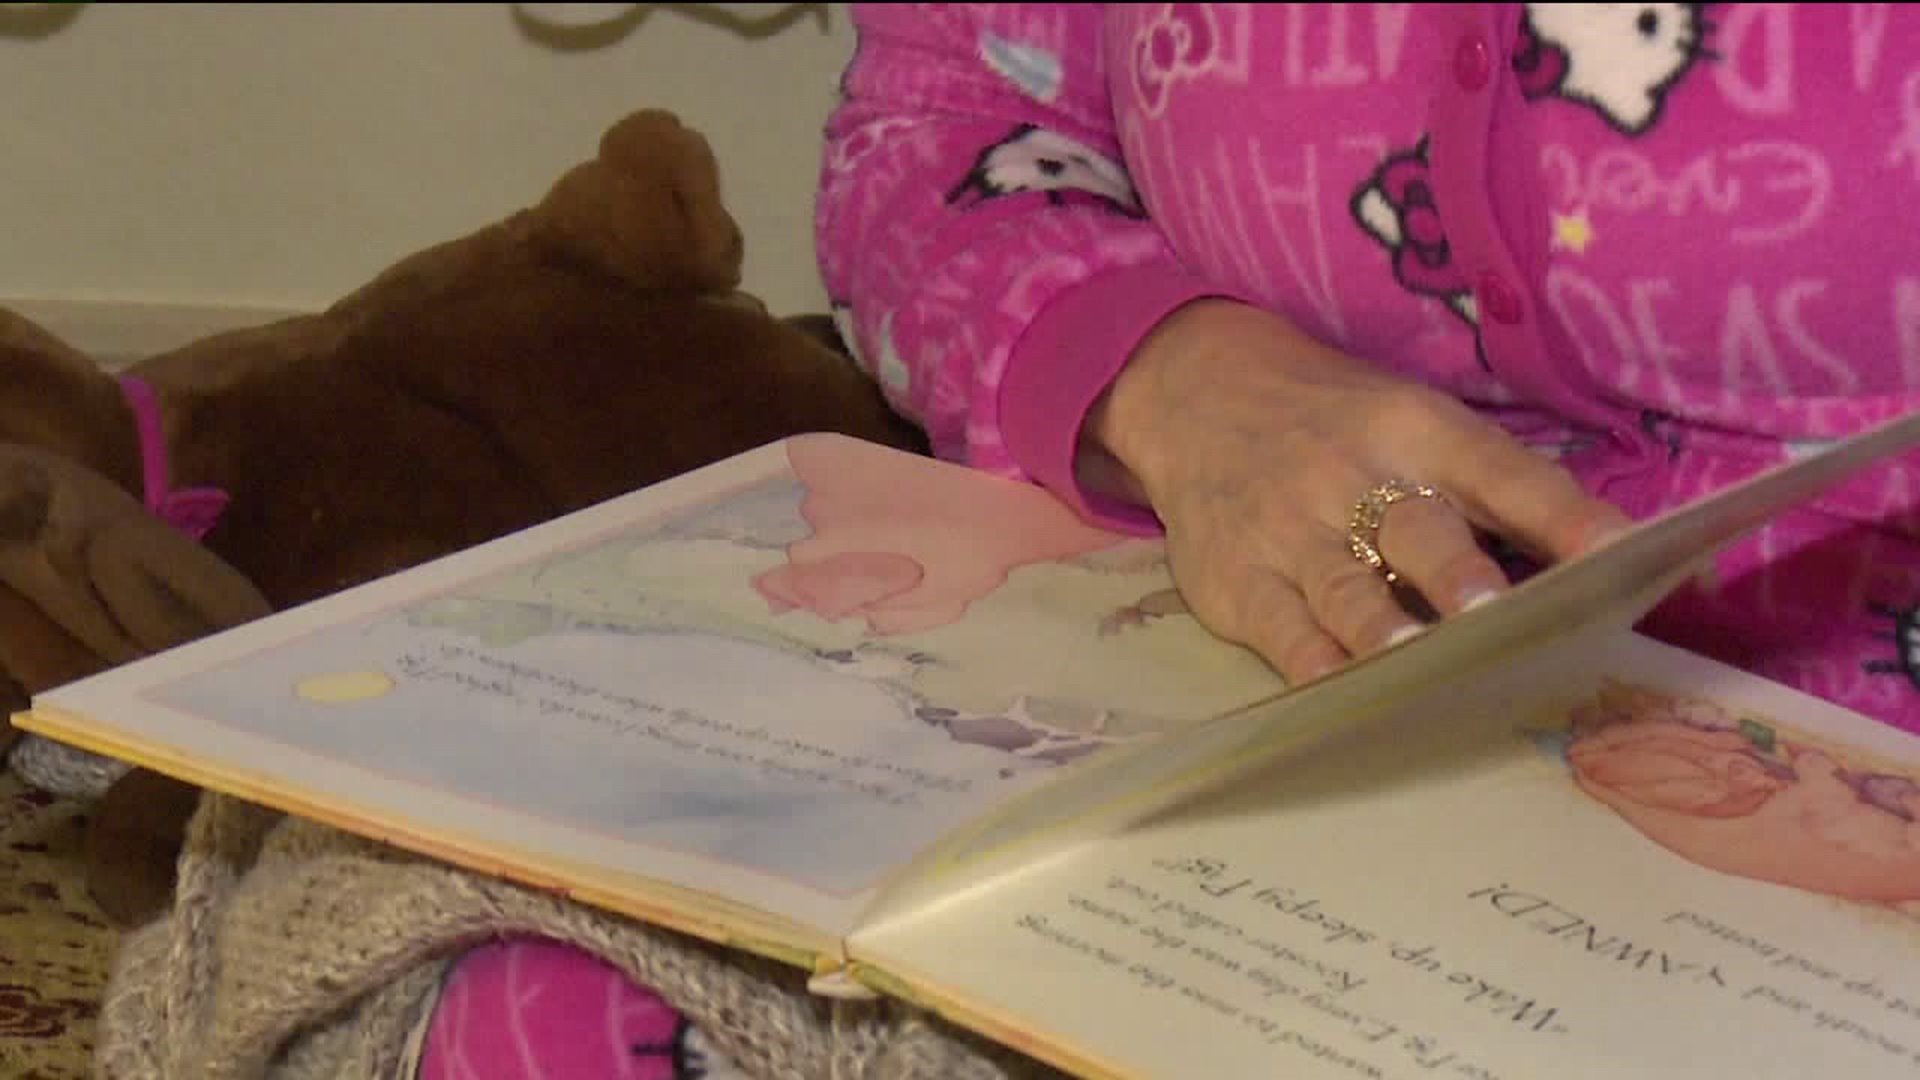 Wayne County Librarian Making Sure All Children Get Bedtime Stories